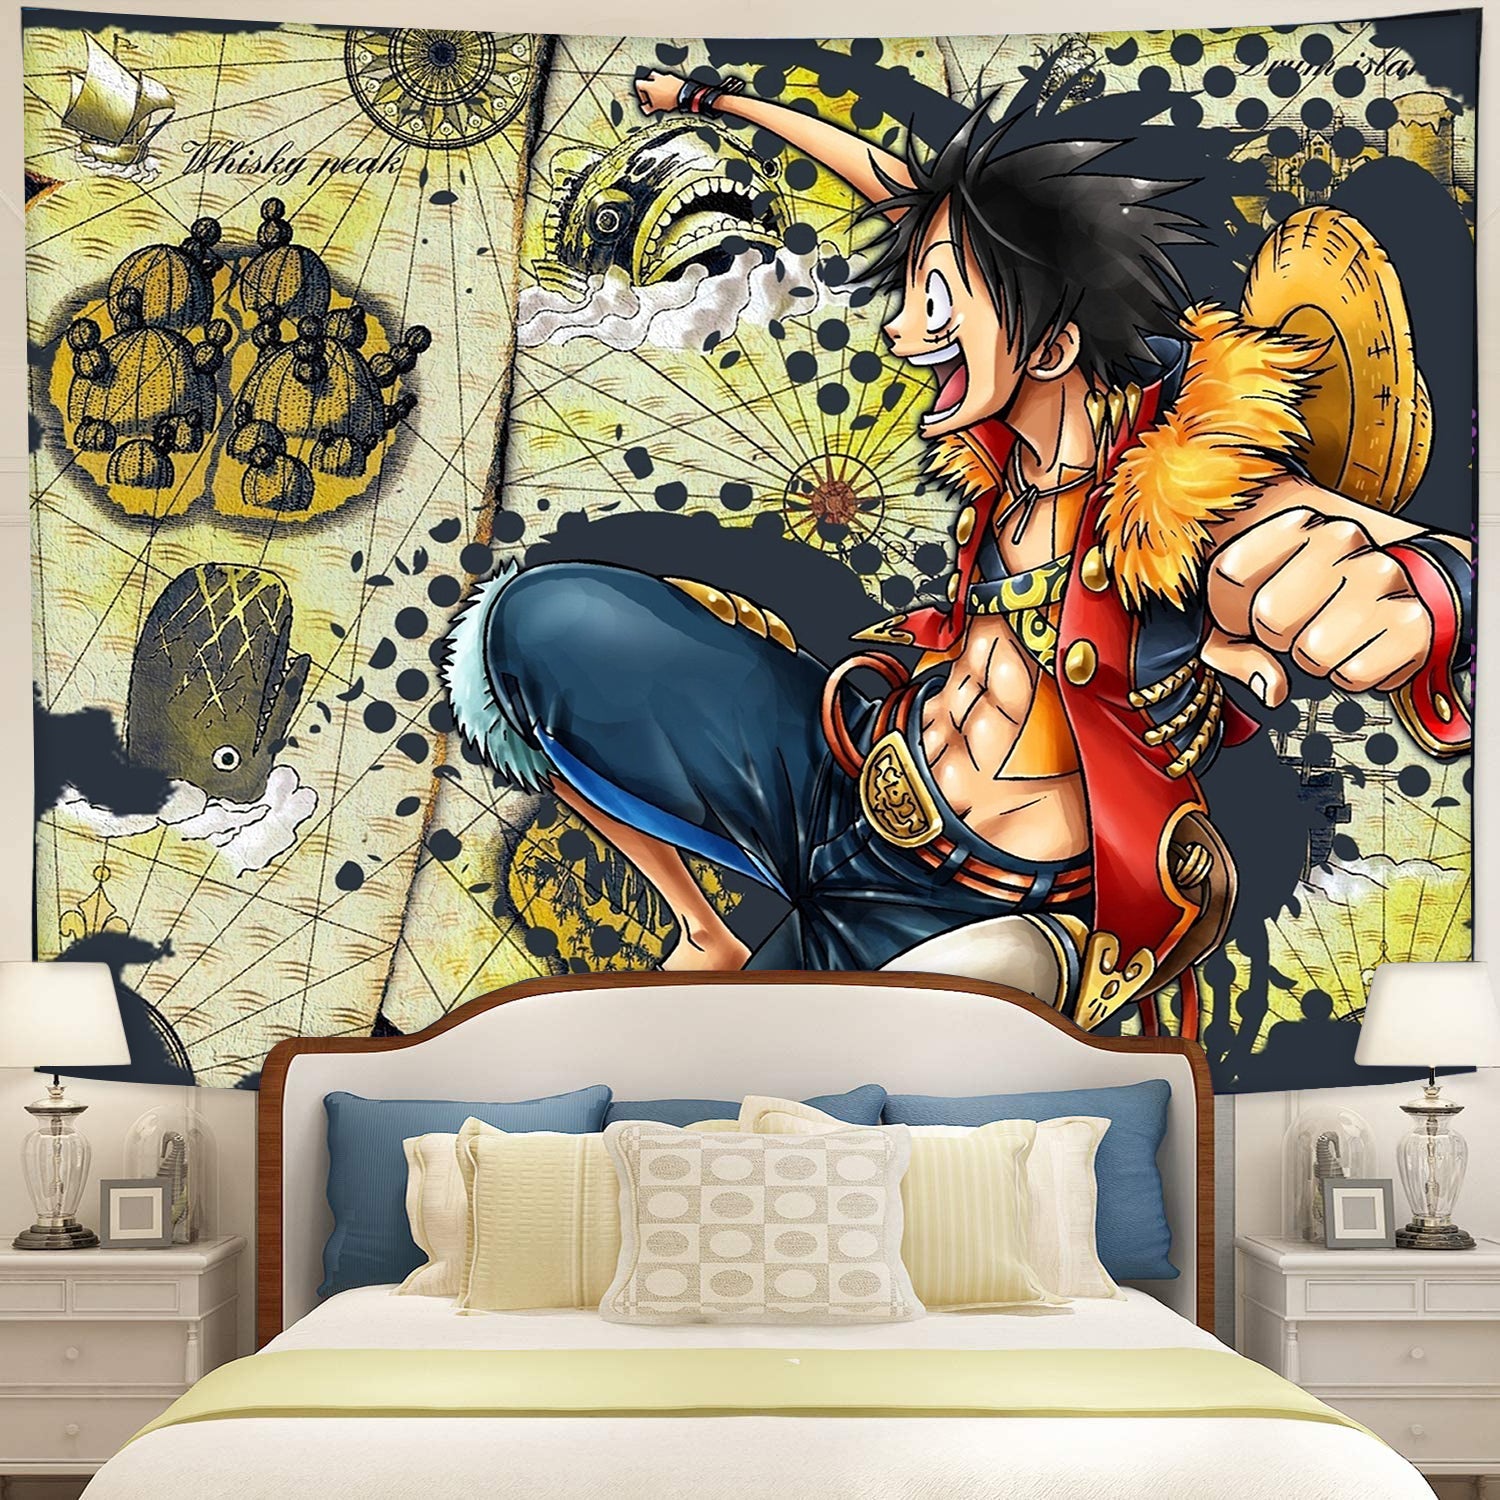 Monkey D. Luffy One Piece Tapestry Room Decor